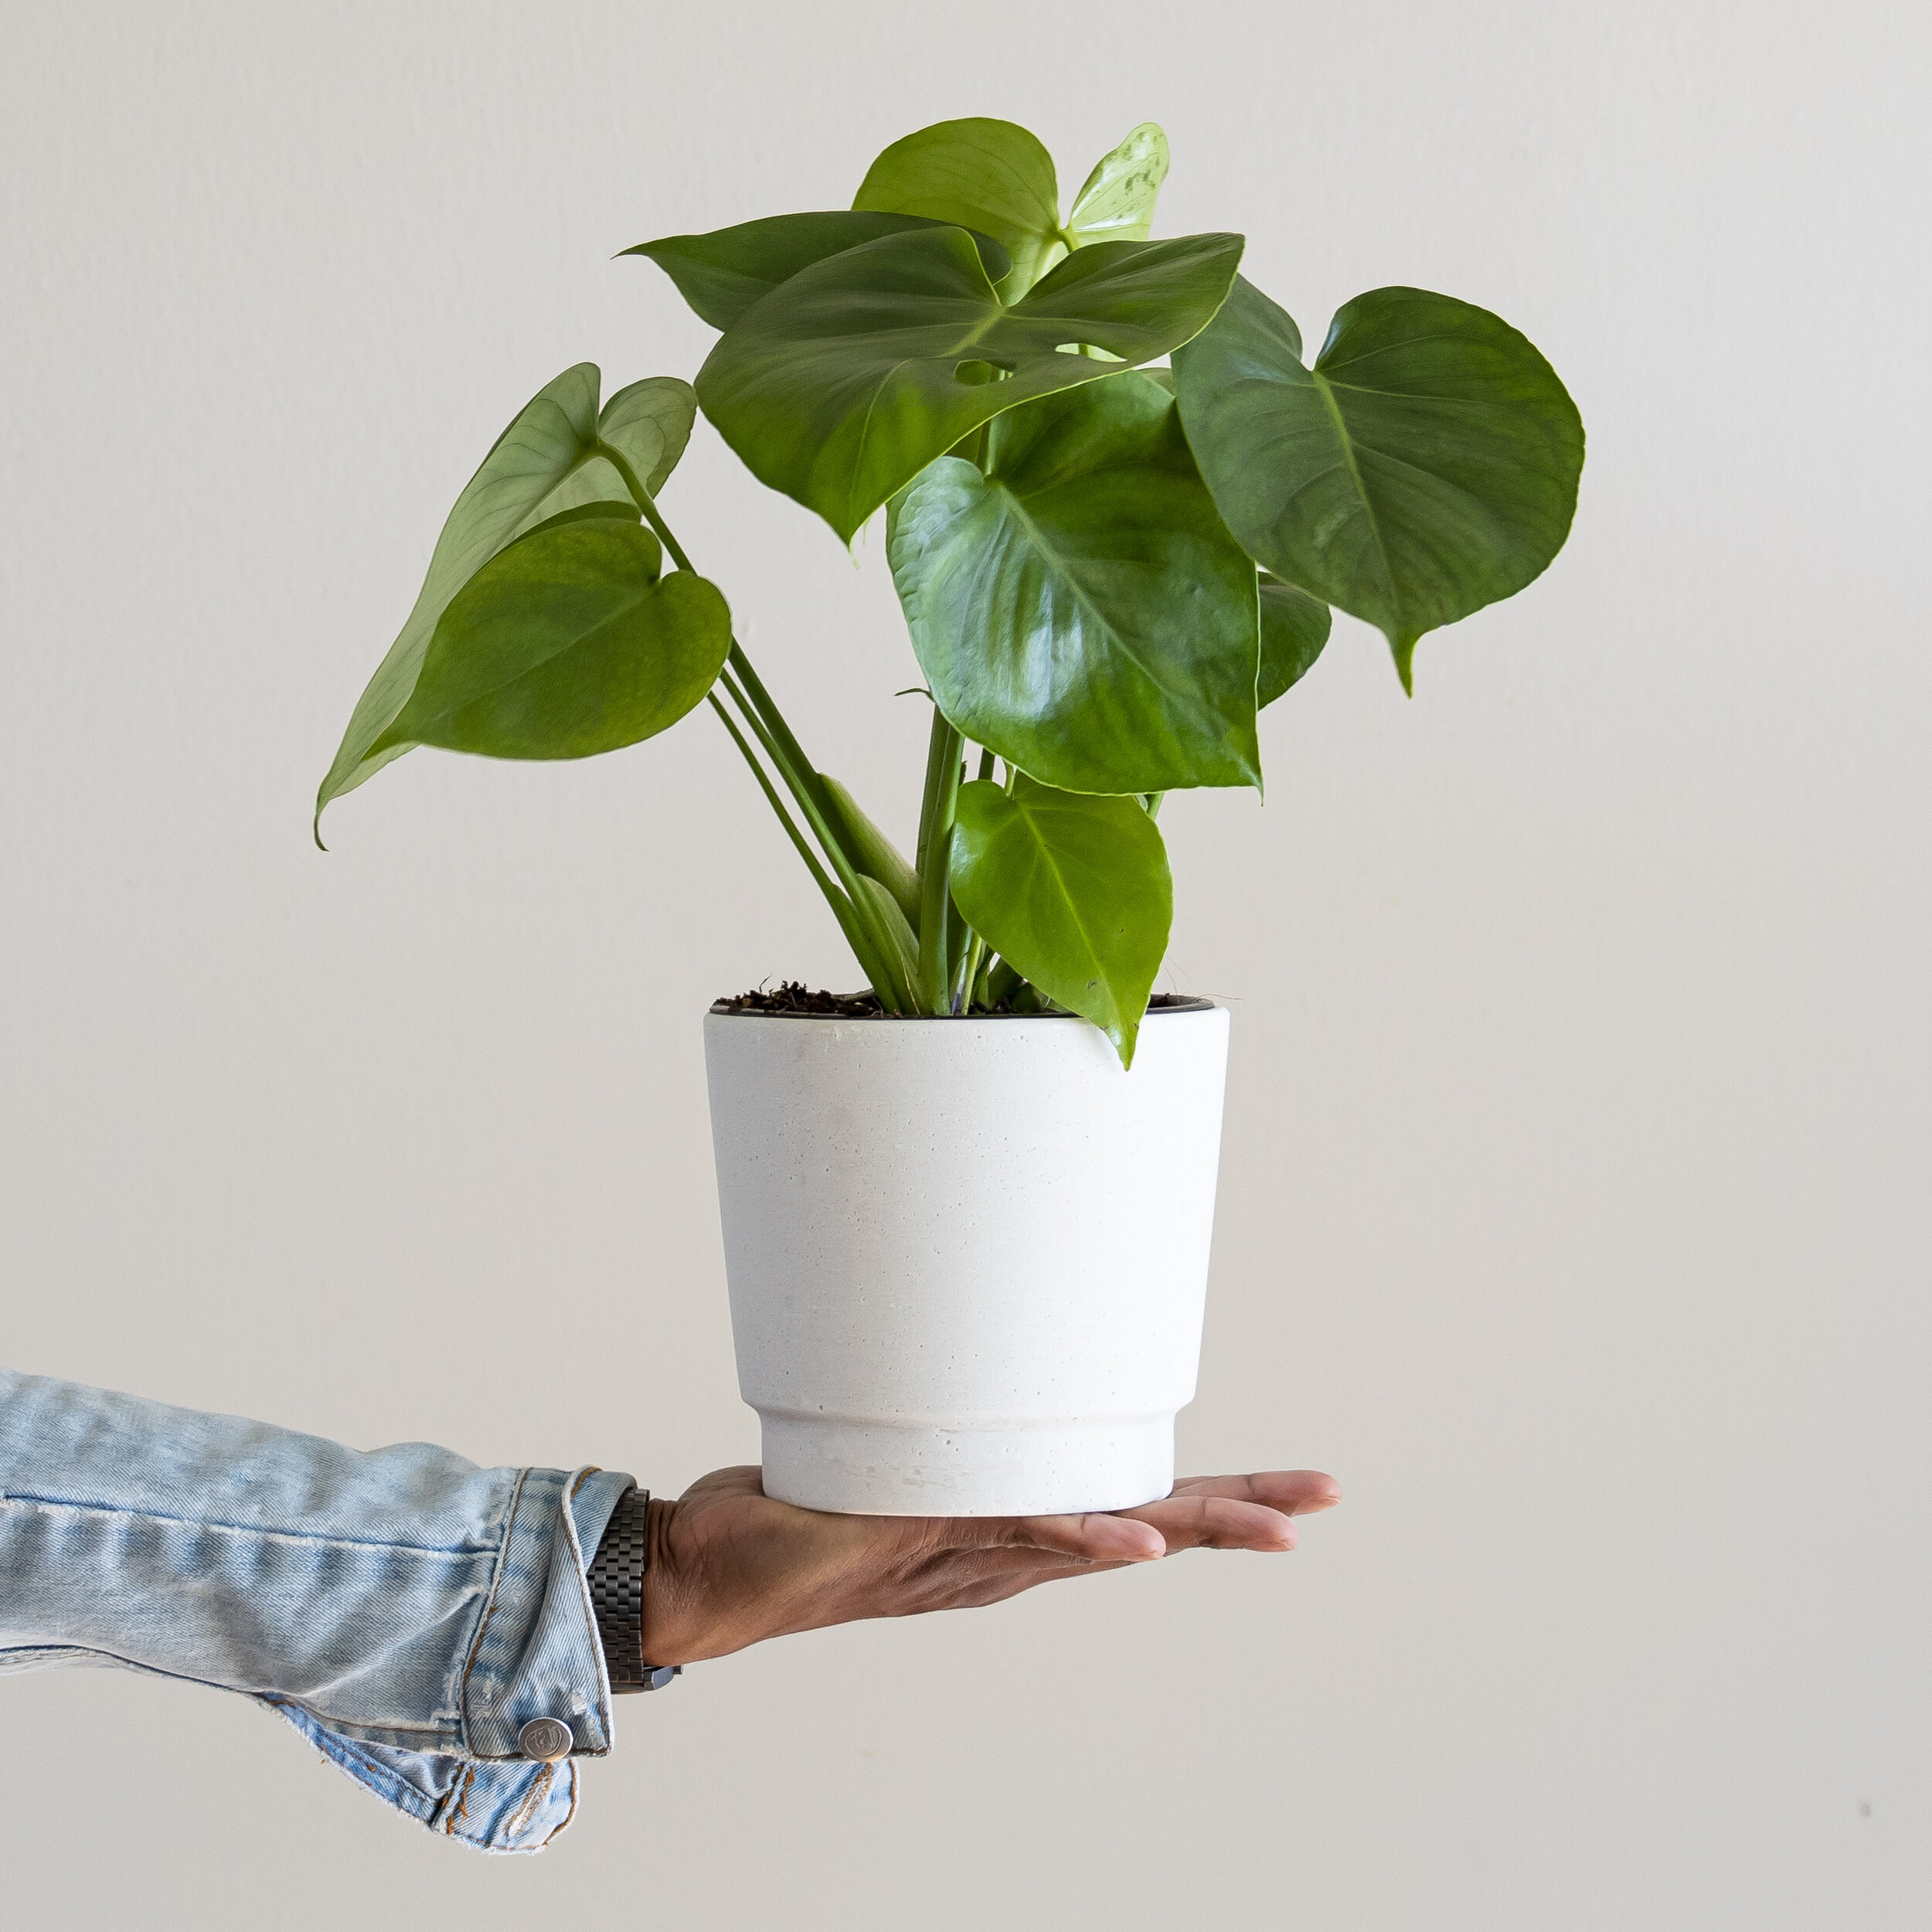 A green Monstera Deliciosa plant in a white pot being held up by a hand in front of a beige background